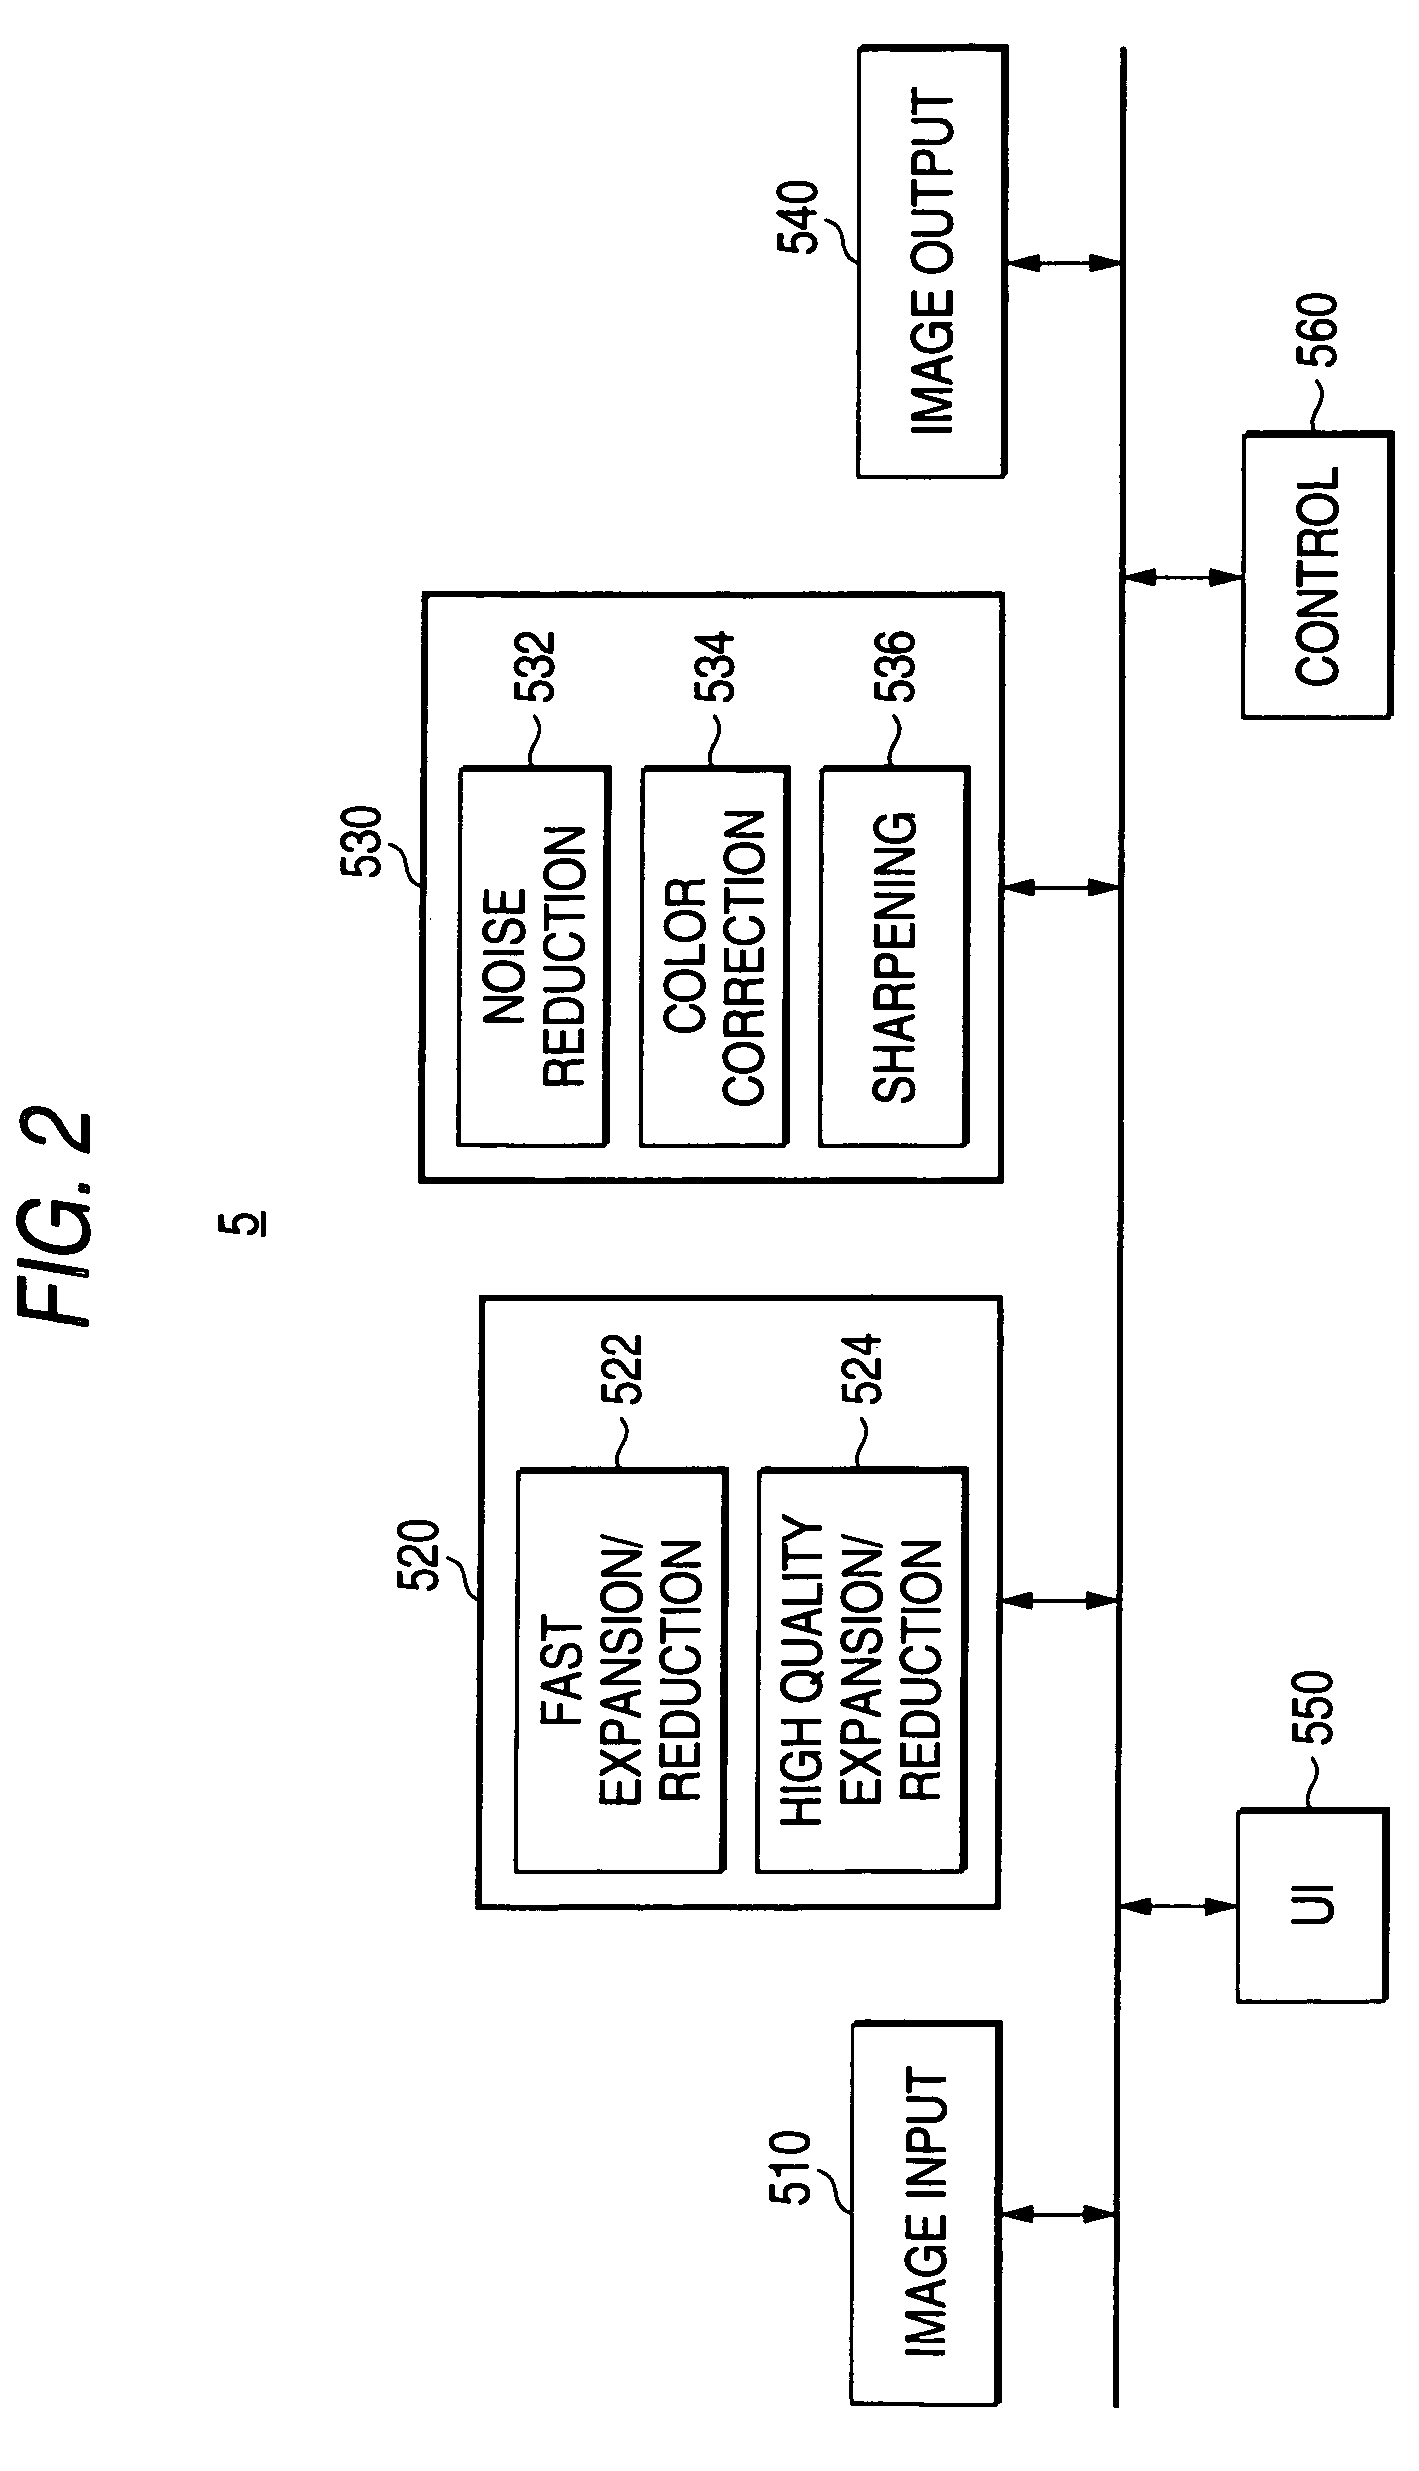 Image processing apparatus, image processing method and program therefor